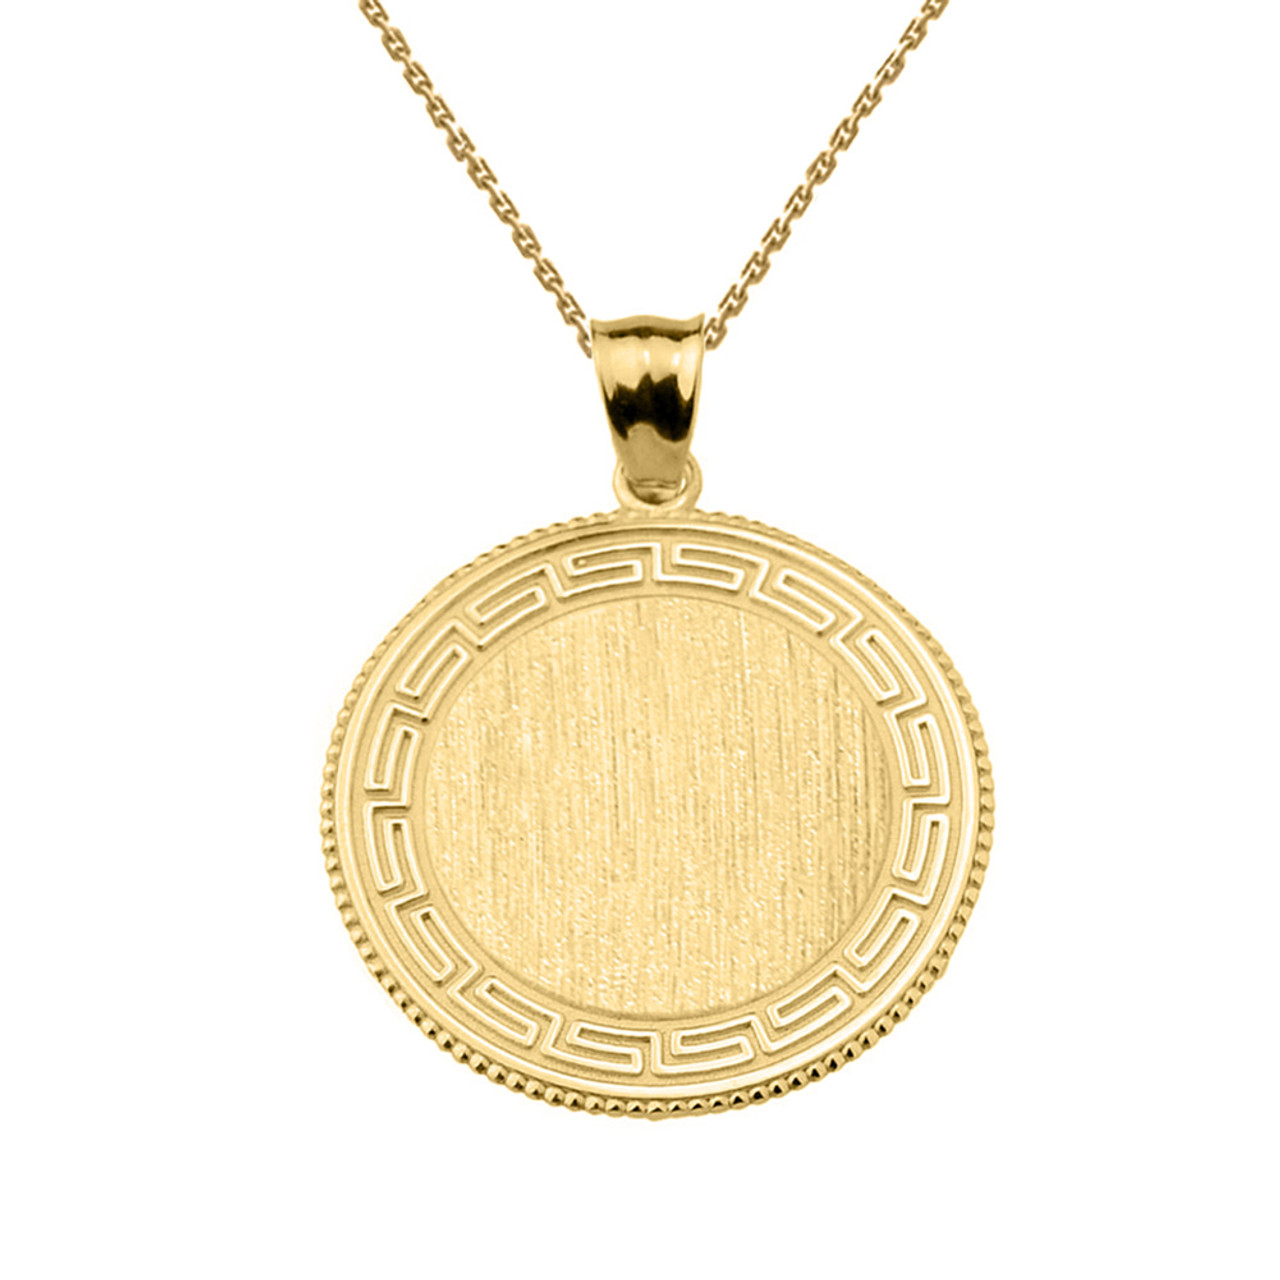 Amazon.com: MUSEUM REPRODUCTIONS Classical Meander Gold Link Necklace -  Inspired by Greek Architecture - 16